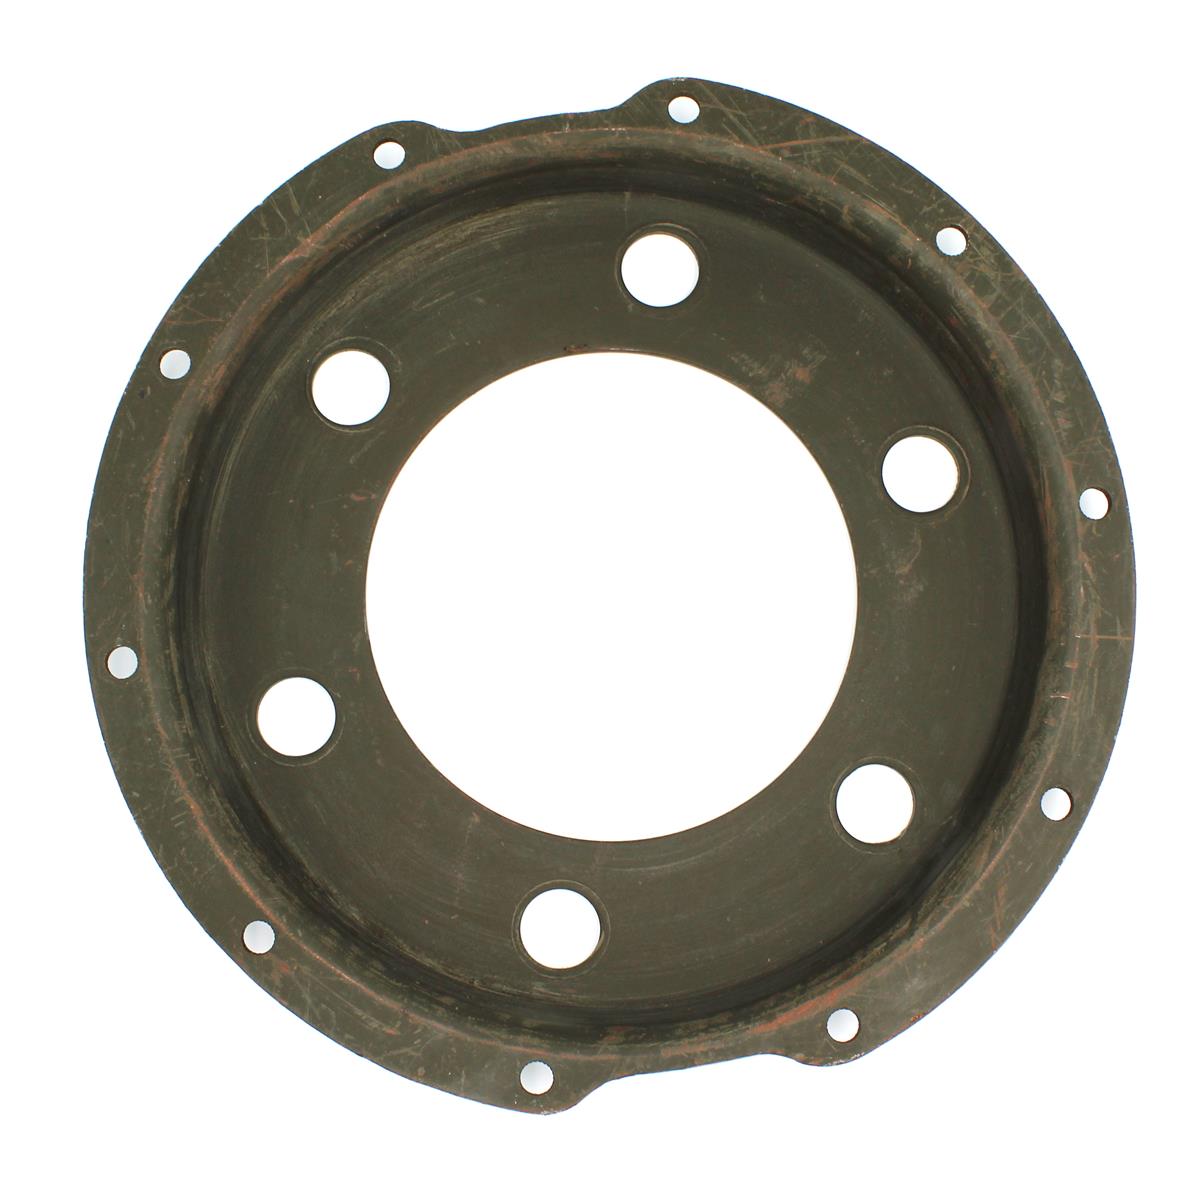 M35-843 | M35-843 Front Brake Drum Adapter Rockwell Steering Axle M35A2 (9).JPG